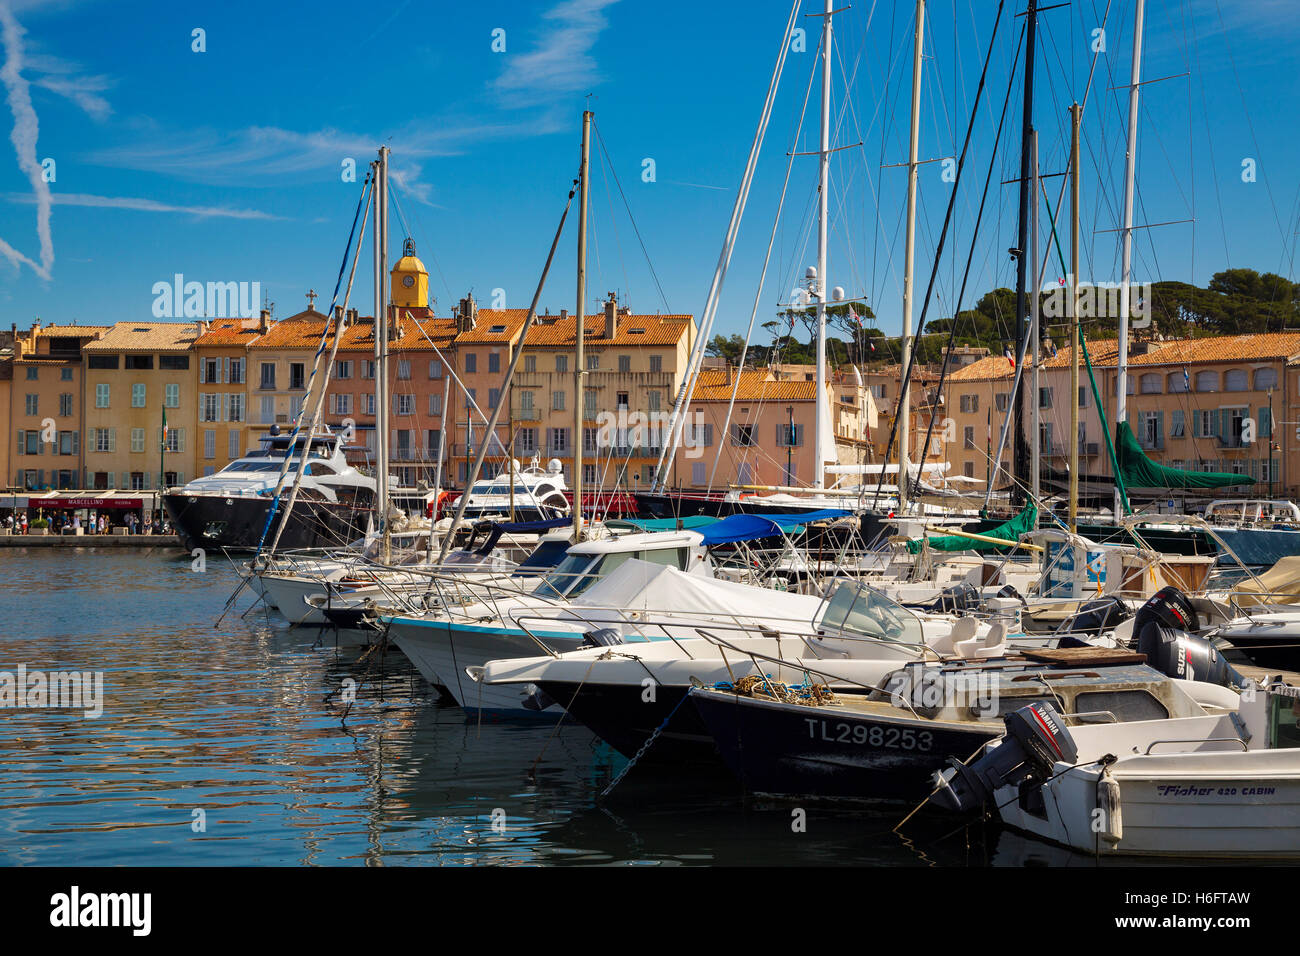 Fishing boats at fishing port, Marina, old harbour. Village of Saint Tropez. Var department, Provence Alpes Cote d'Azur. French Stock Photo